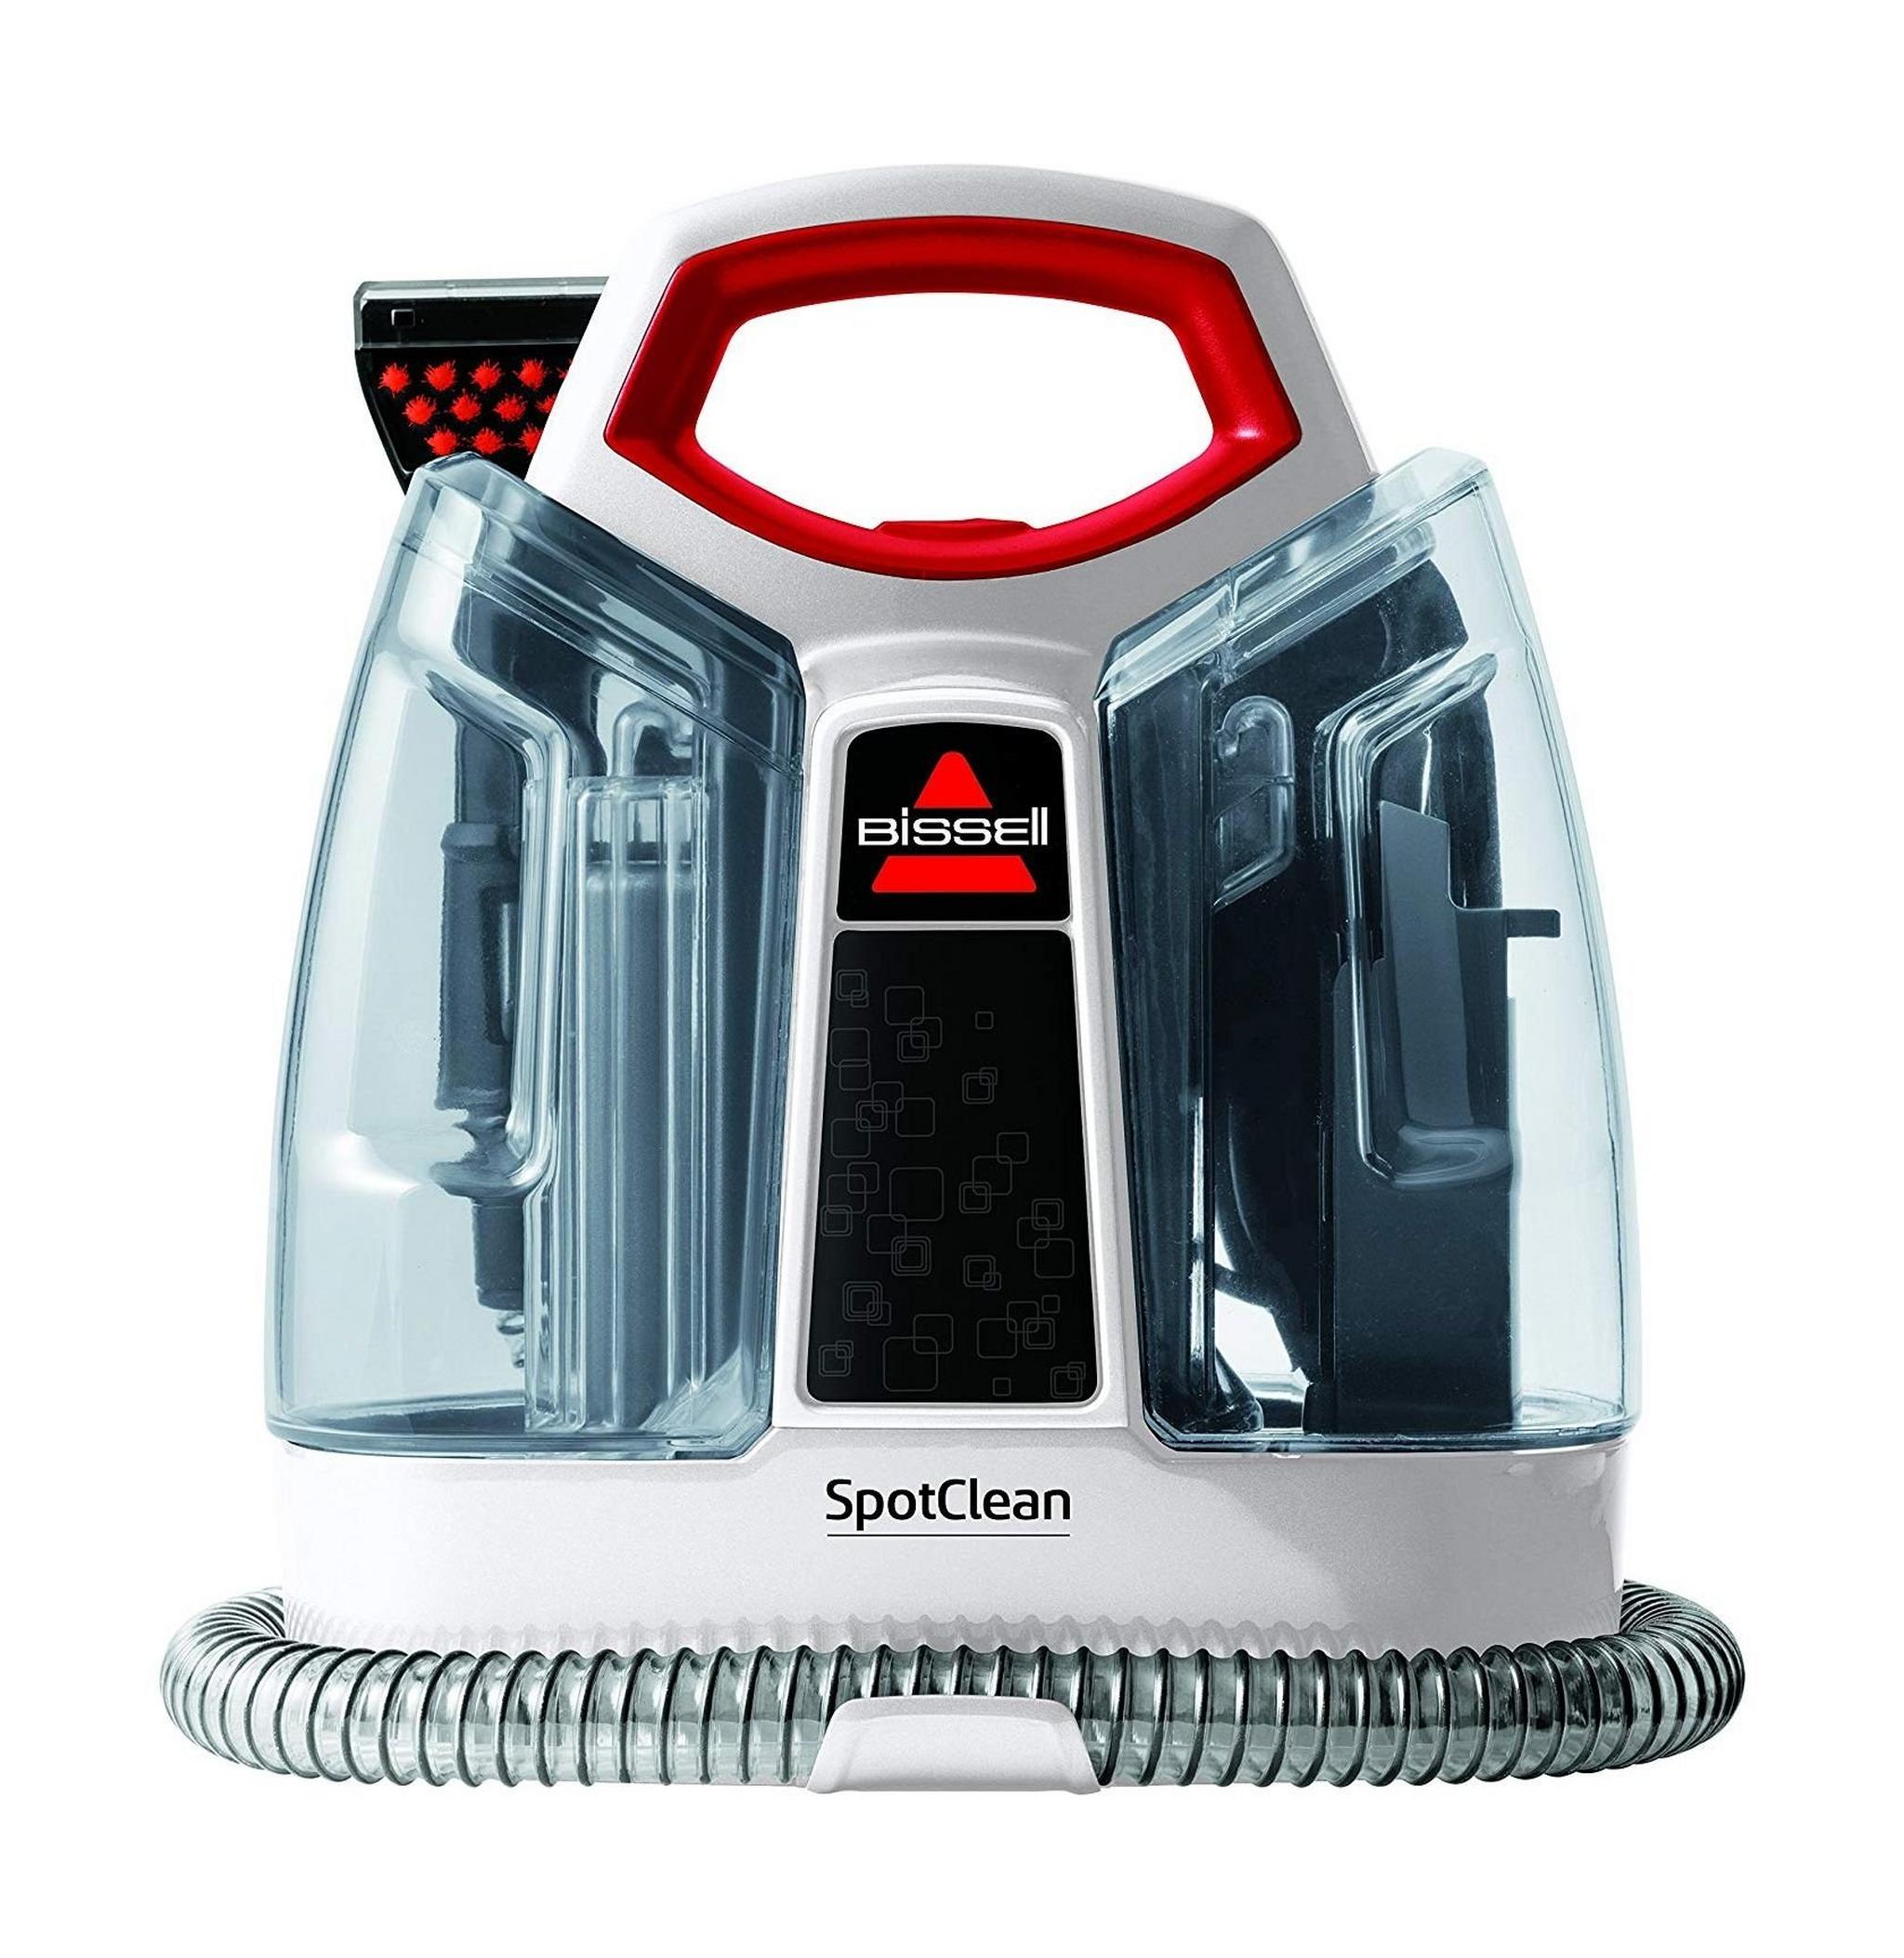 Bissell SpotClean Portable Carpet Cleaner, 275 W, 3698 - White